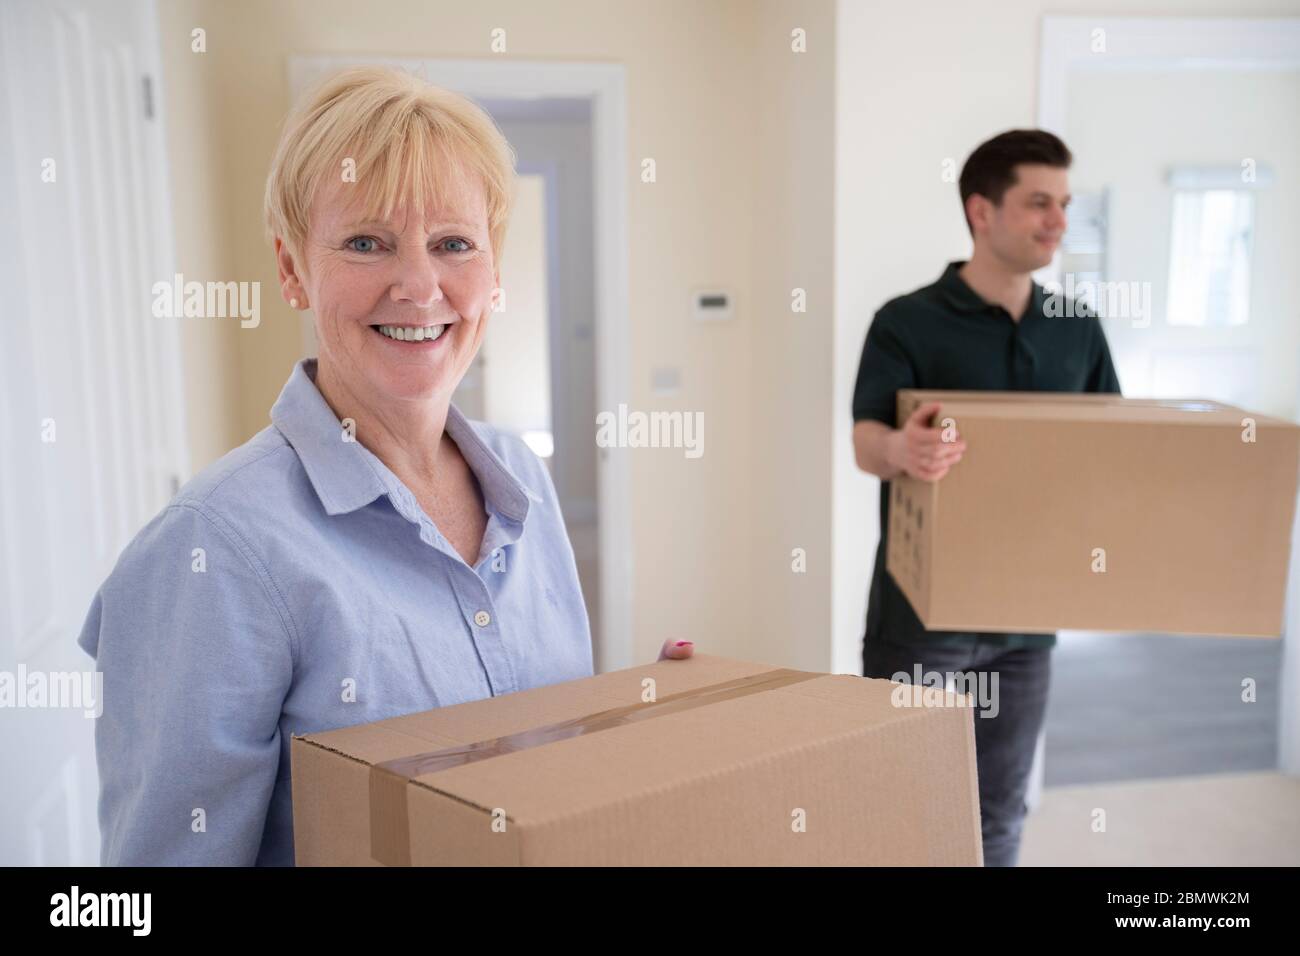 Portrait Of Senior Woman Downsizing In Retirement Carrying Boxes Into New Home On Moving Day With Removal Man Helping Stock Photo